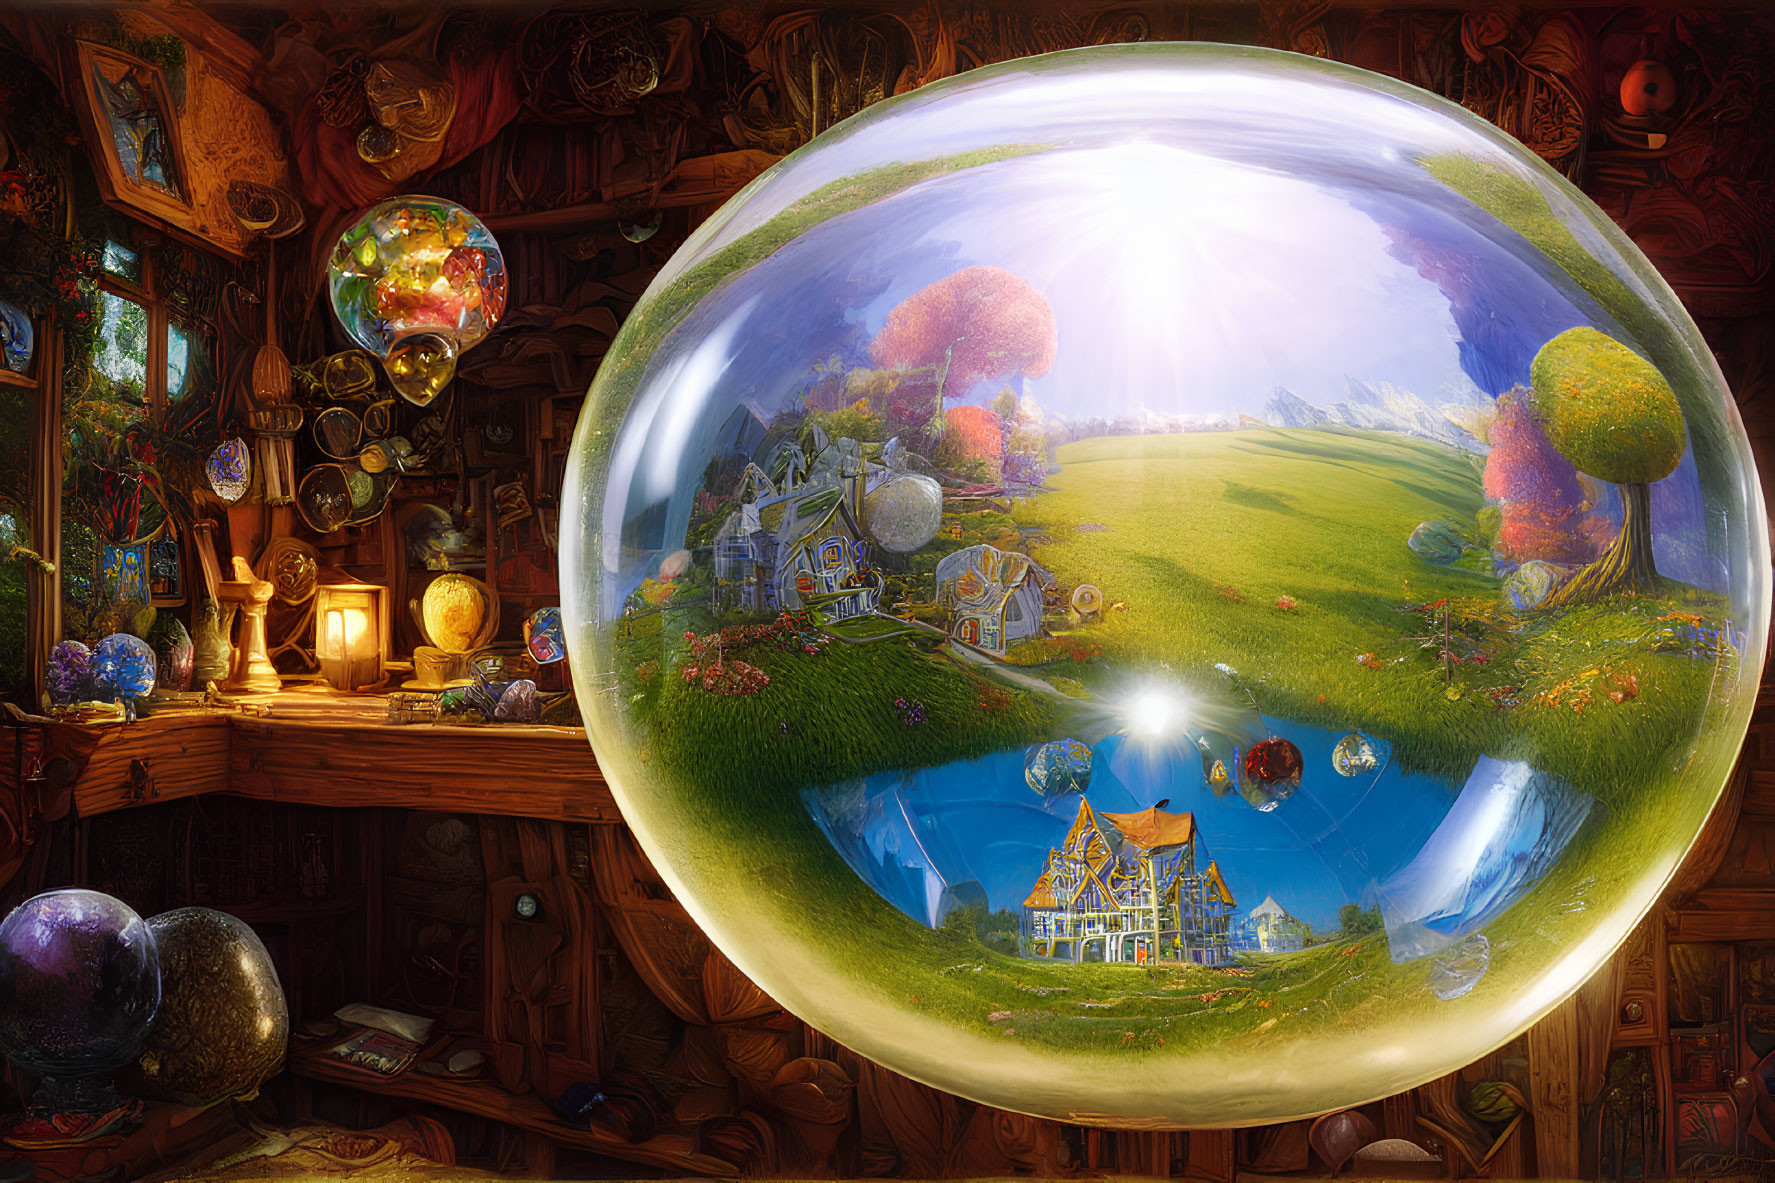 Fantasy artwork of magical room with crystal ball and whimsical landscape